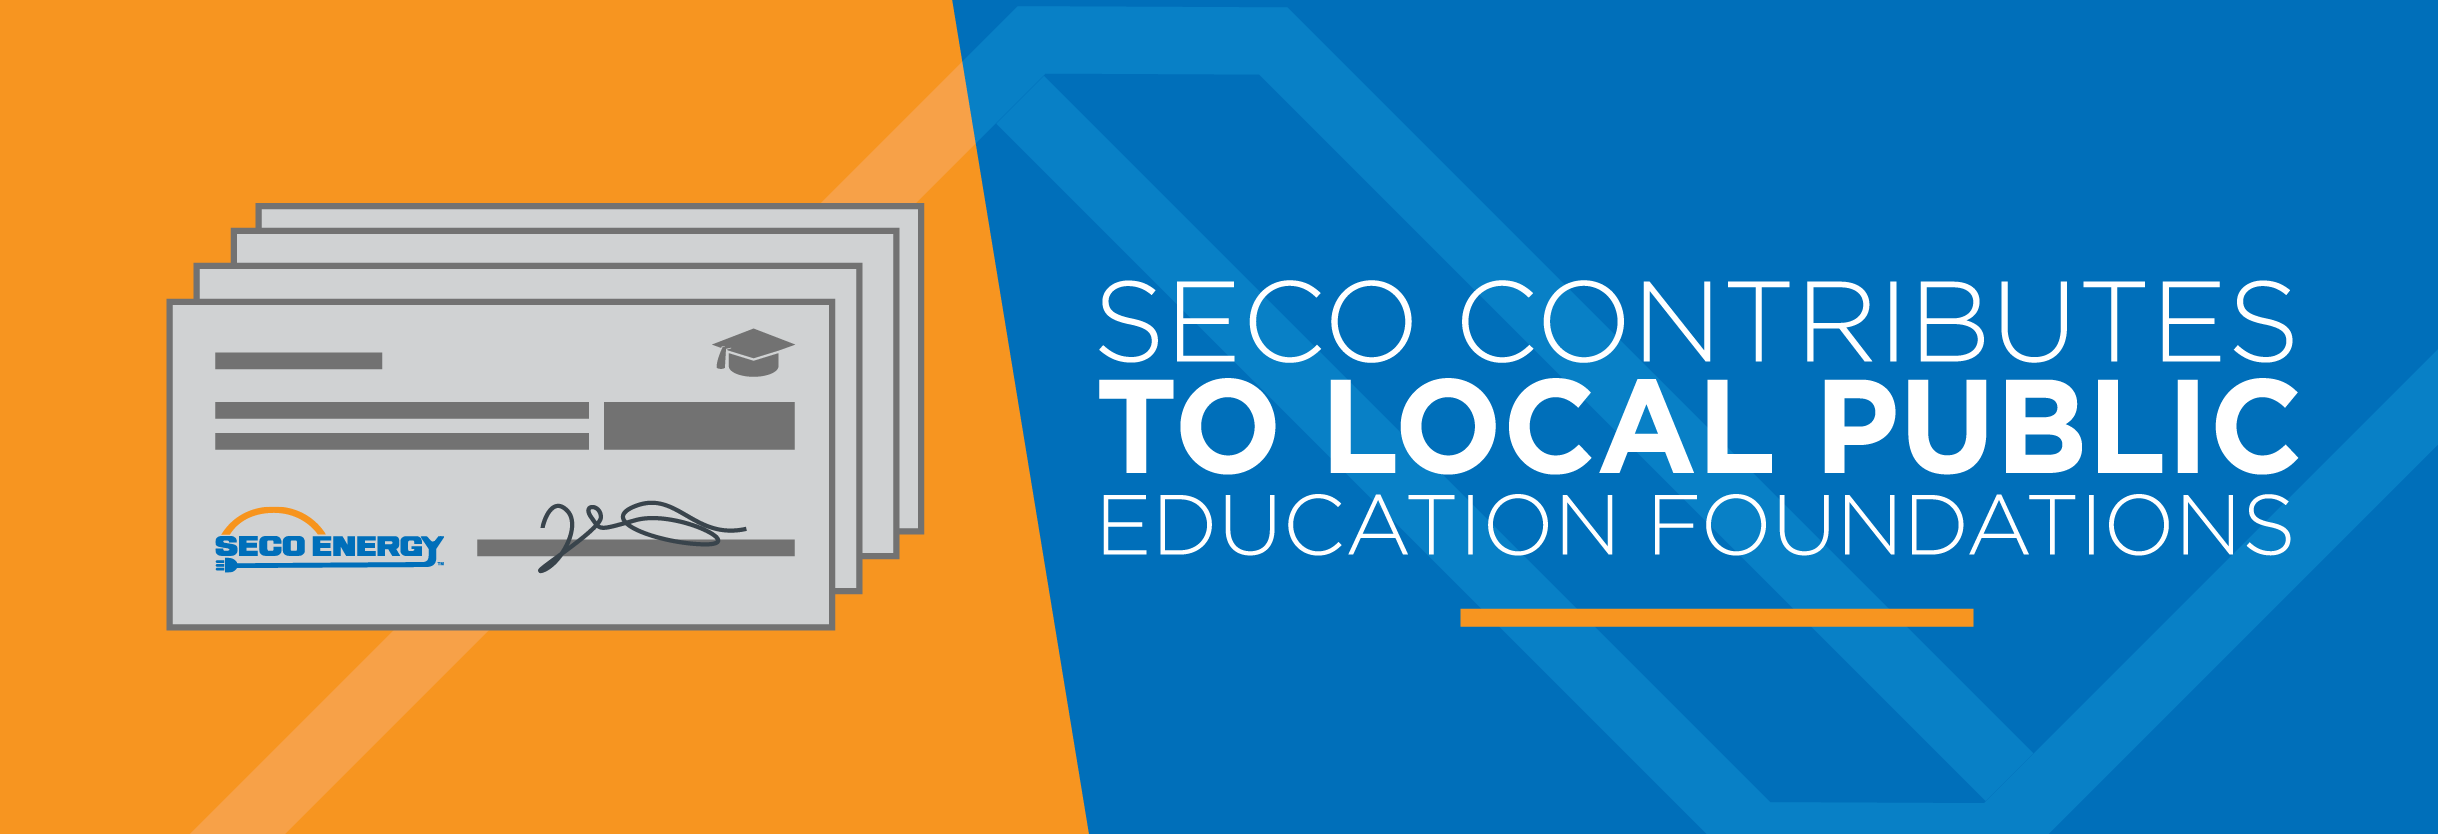 SECO Contributes to Local Public Education Foundations October 2018